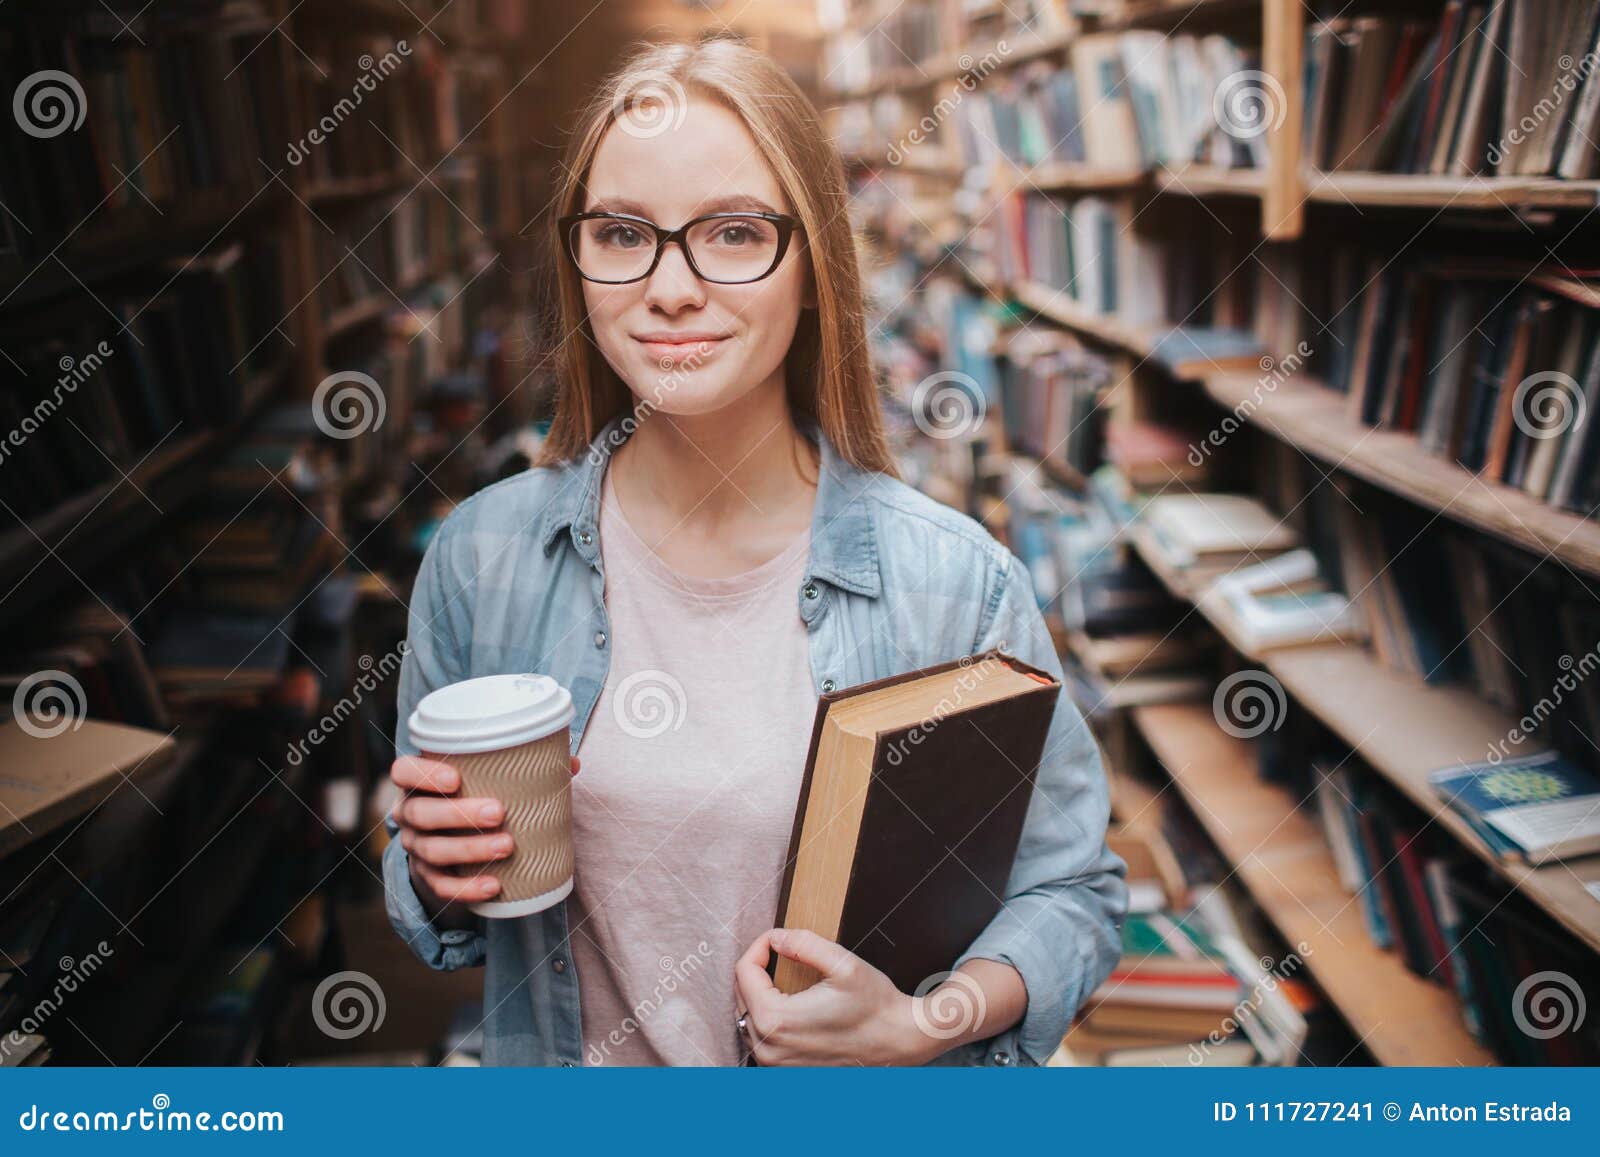 Smart And Clever Student Is Standing In The Public Library. She Is Holding A Cup Of ...